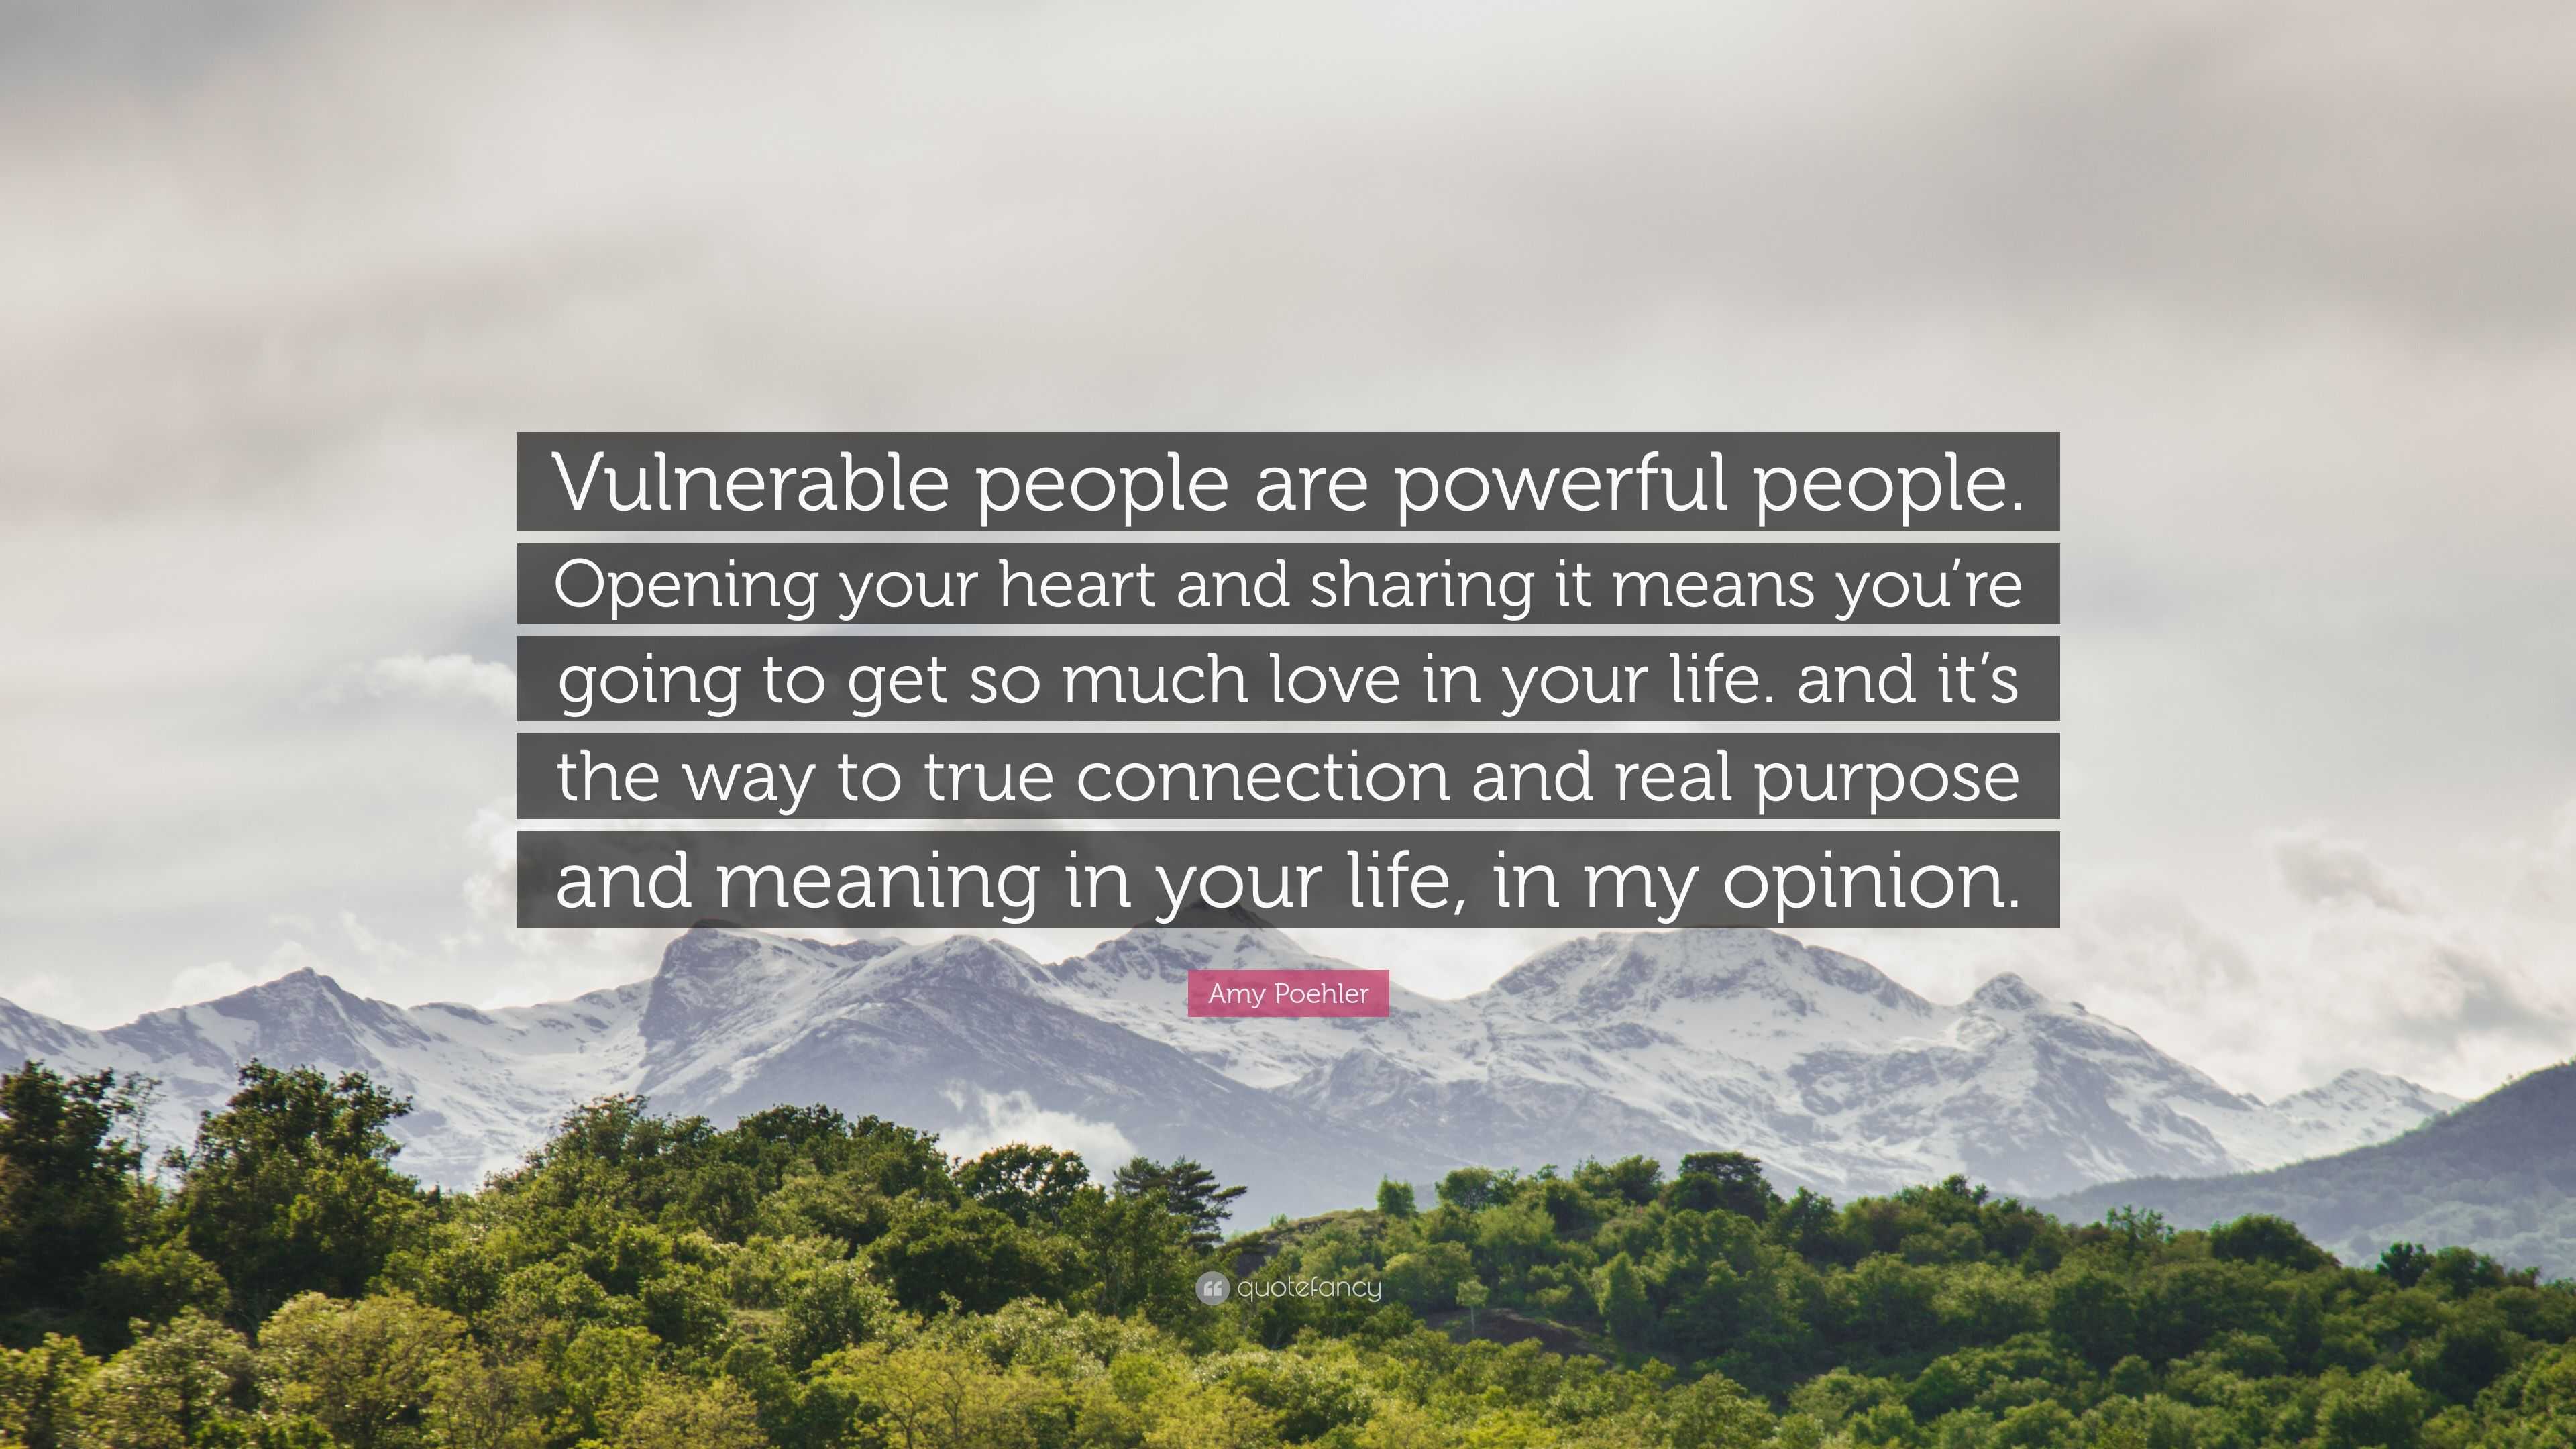 Amy Poehler Quote “Vulnerable people are powerful people Opening your heart and sharing